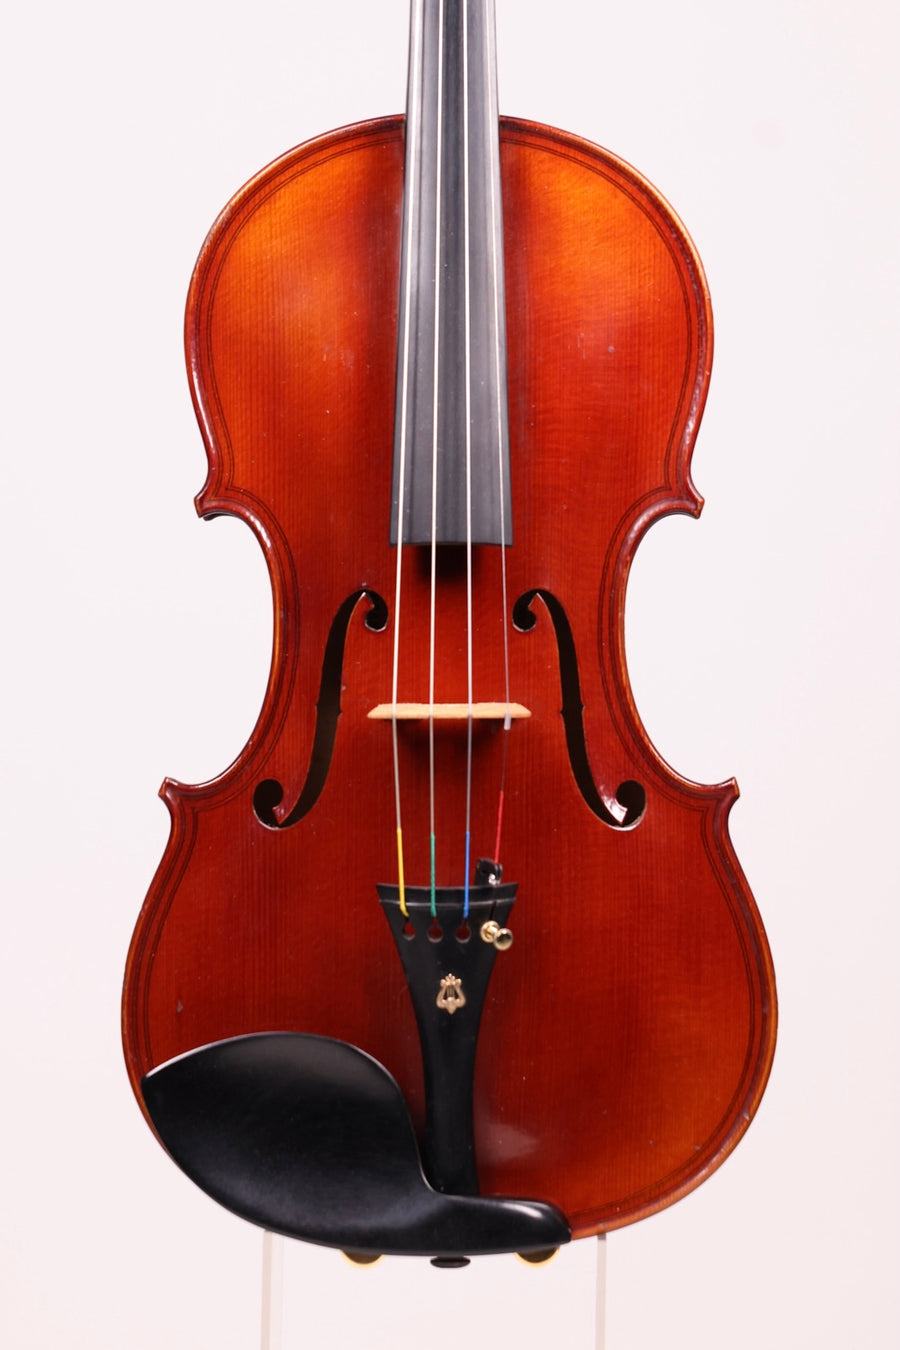 A Good French Violin From Collin Mezin III, “Select” No. 22, 1948.